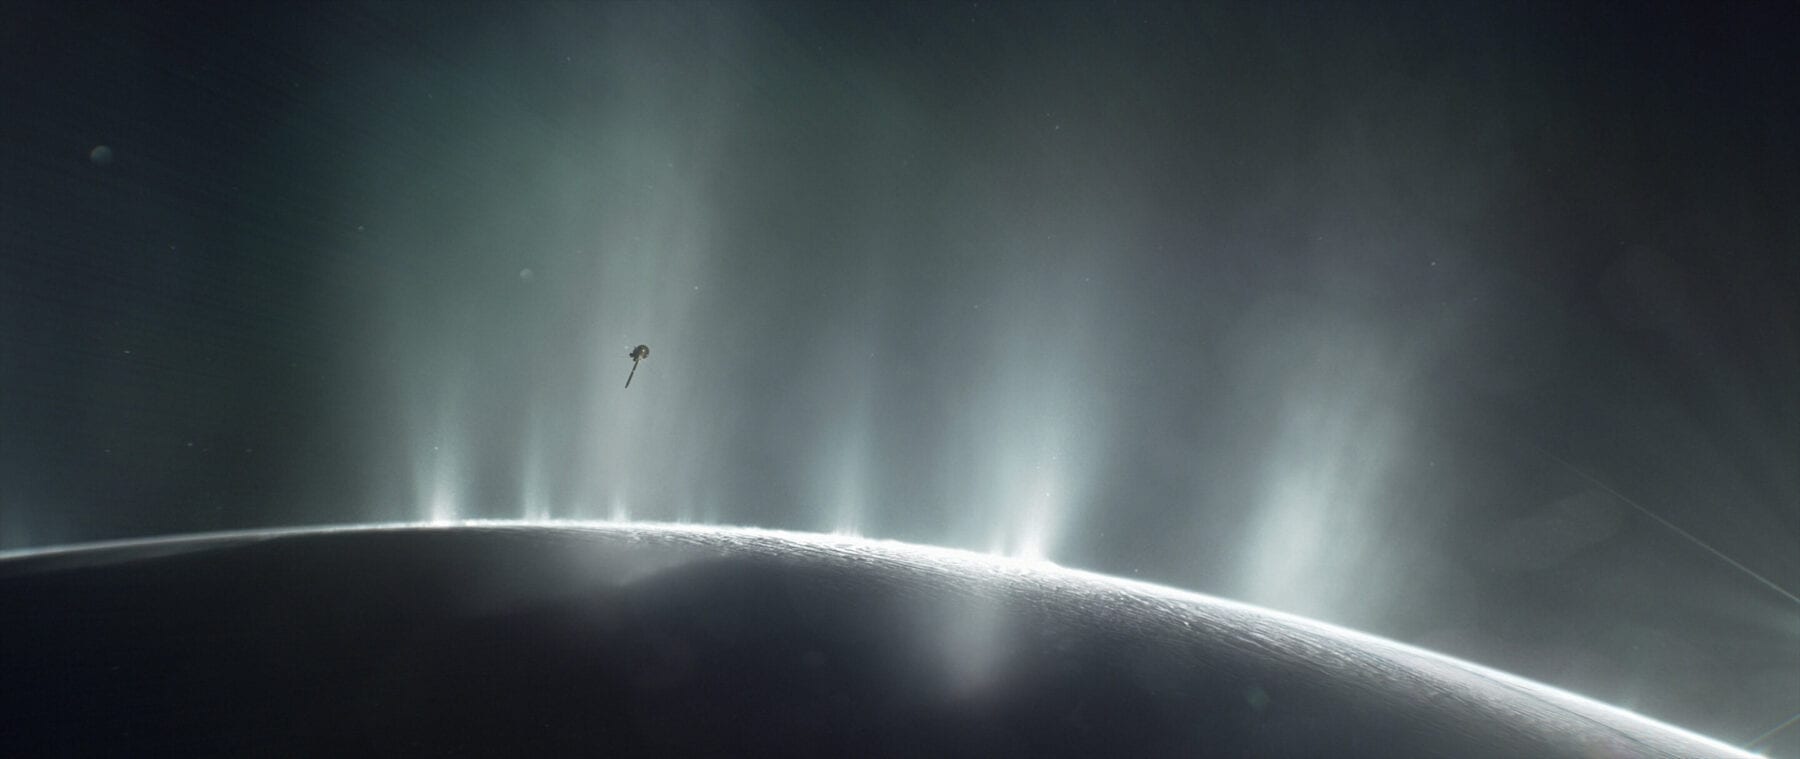 This artist's impression depicts NASA's Cassini spacecraft flying through a plume of presumed water erupting from the surface of Saturn's moon Enceladus.
NASA